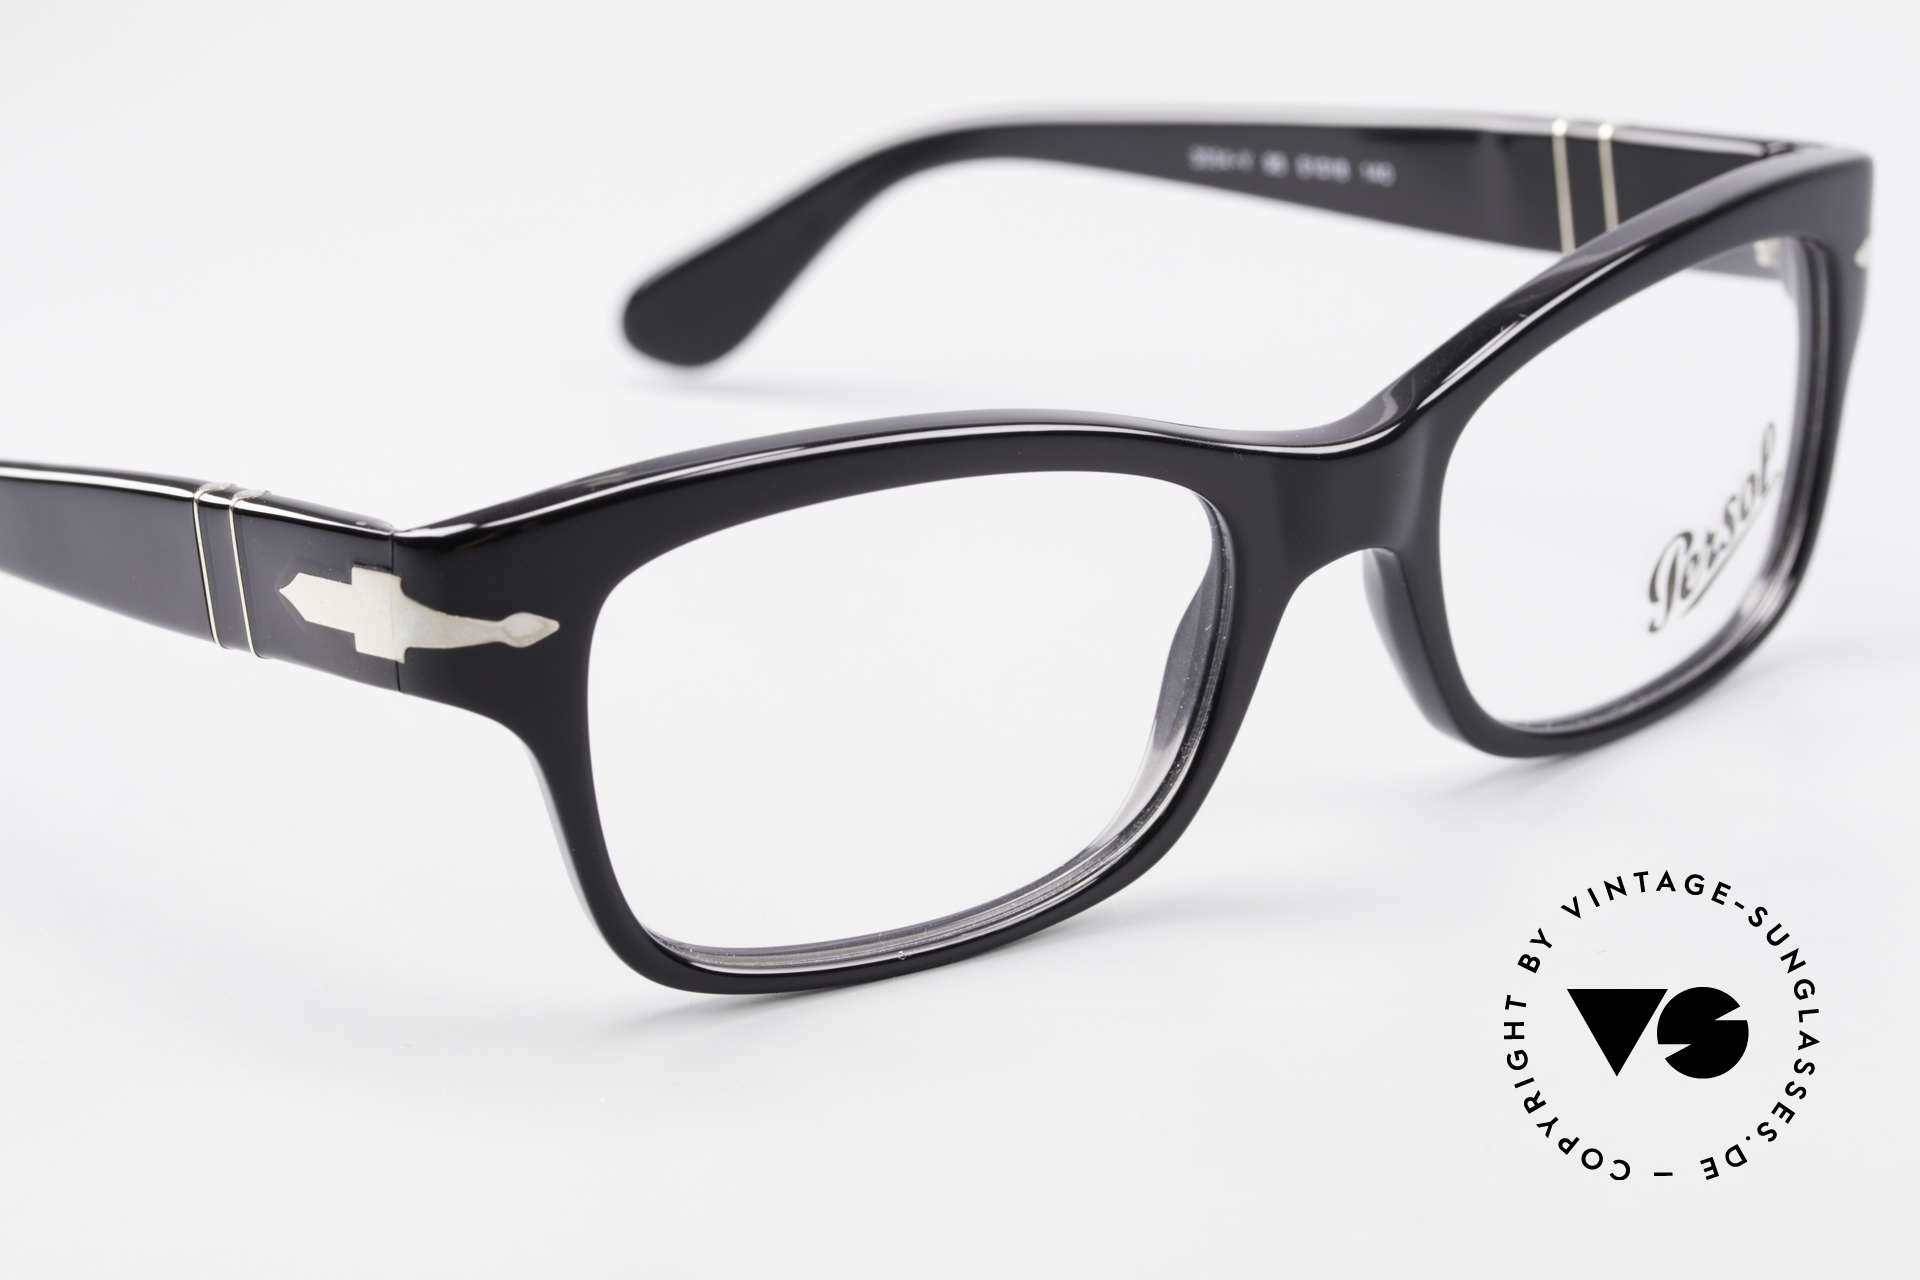 Persol 3054 Vintage Glasses Classic Frame, DEMOS can be replaced with lenses of any kind, Made for Men and Women